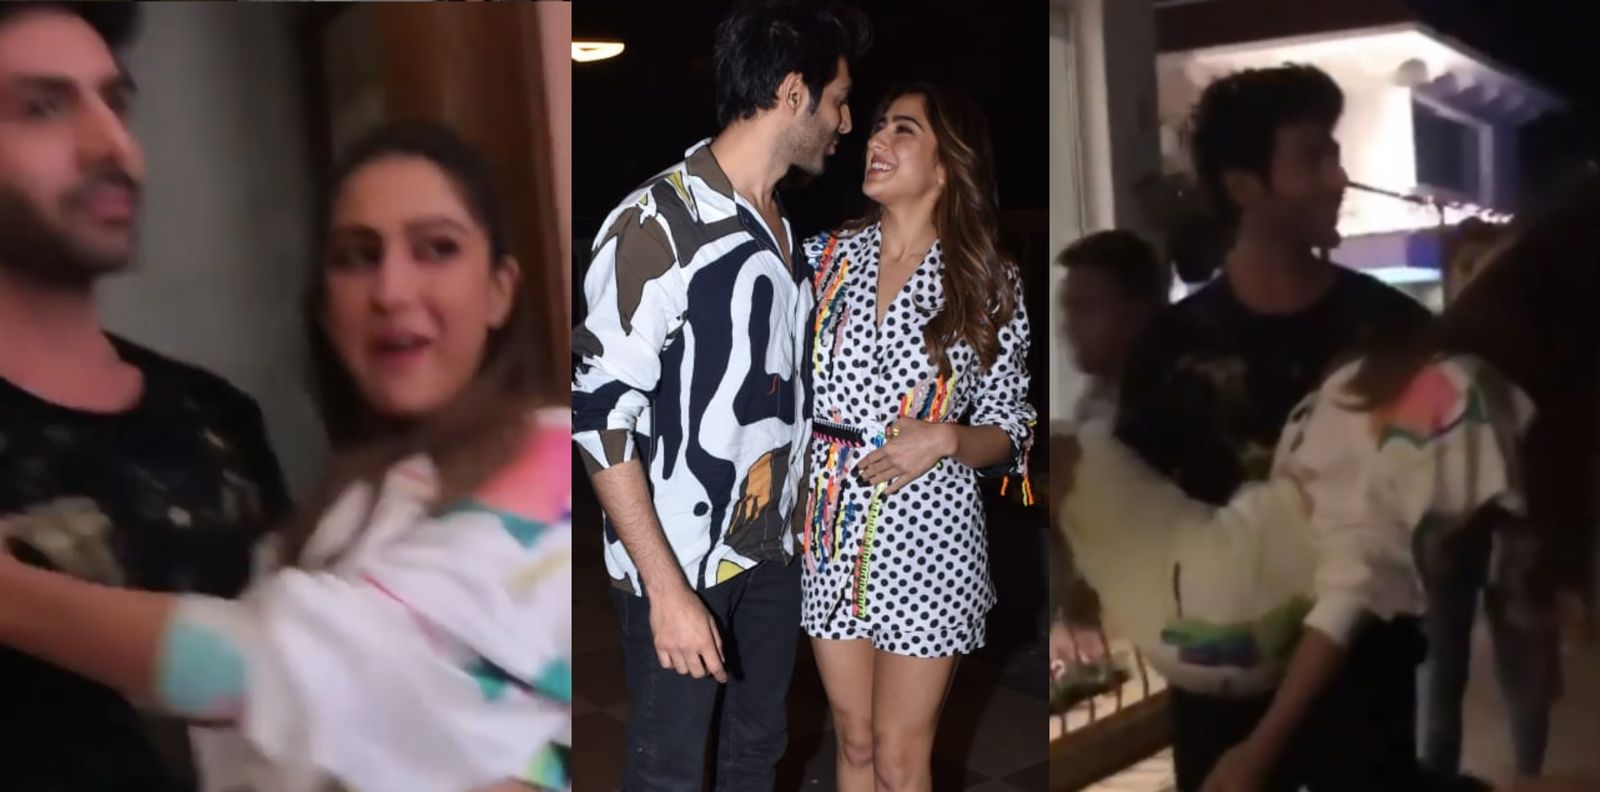 Watch: Kartik Aaryan Lifts And Carries Sara Ali Khan In His Arms To The Stage While Promoting Love Aaj Kal!